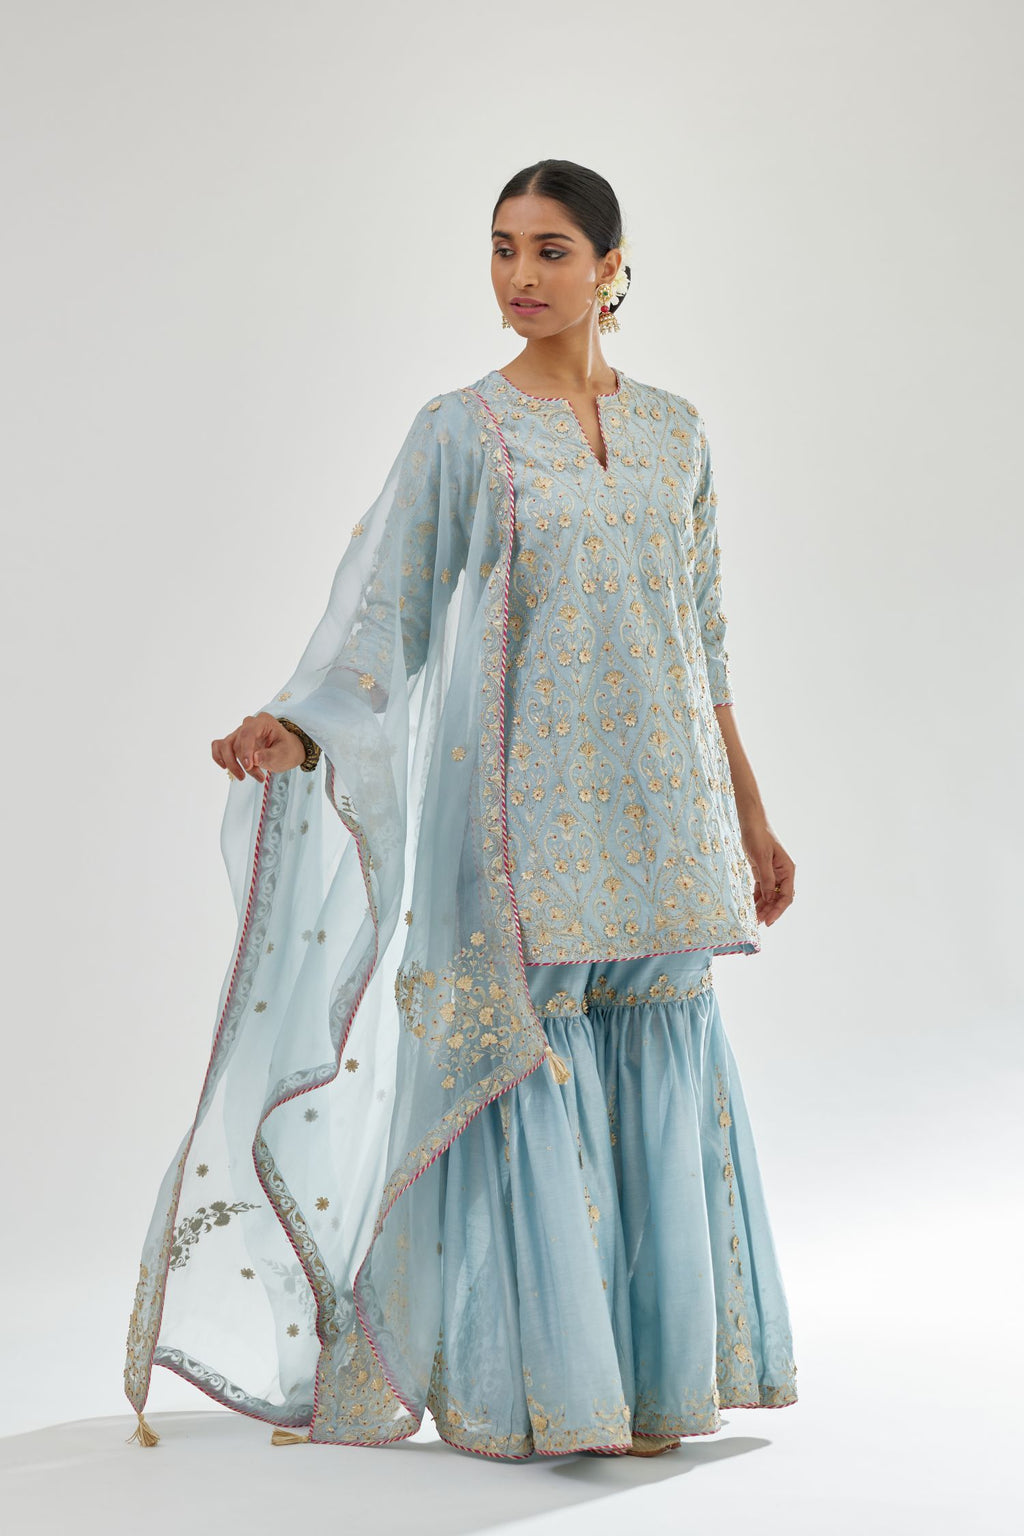 Blue silk organza dupatta with dori and gota embroidery at edges, highlighted with contrast bead work.